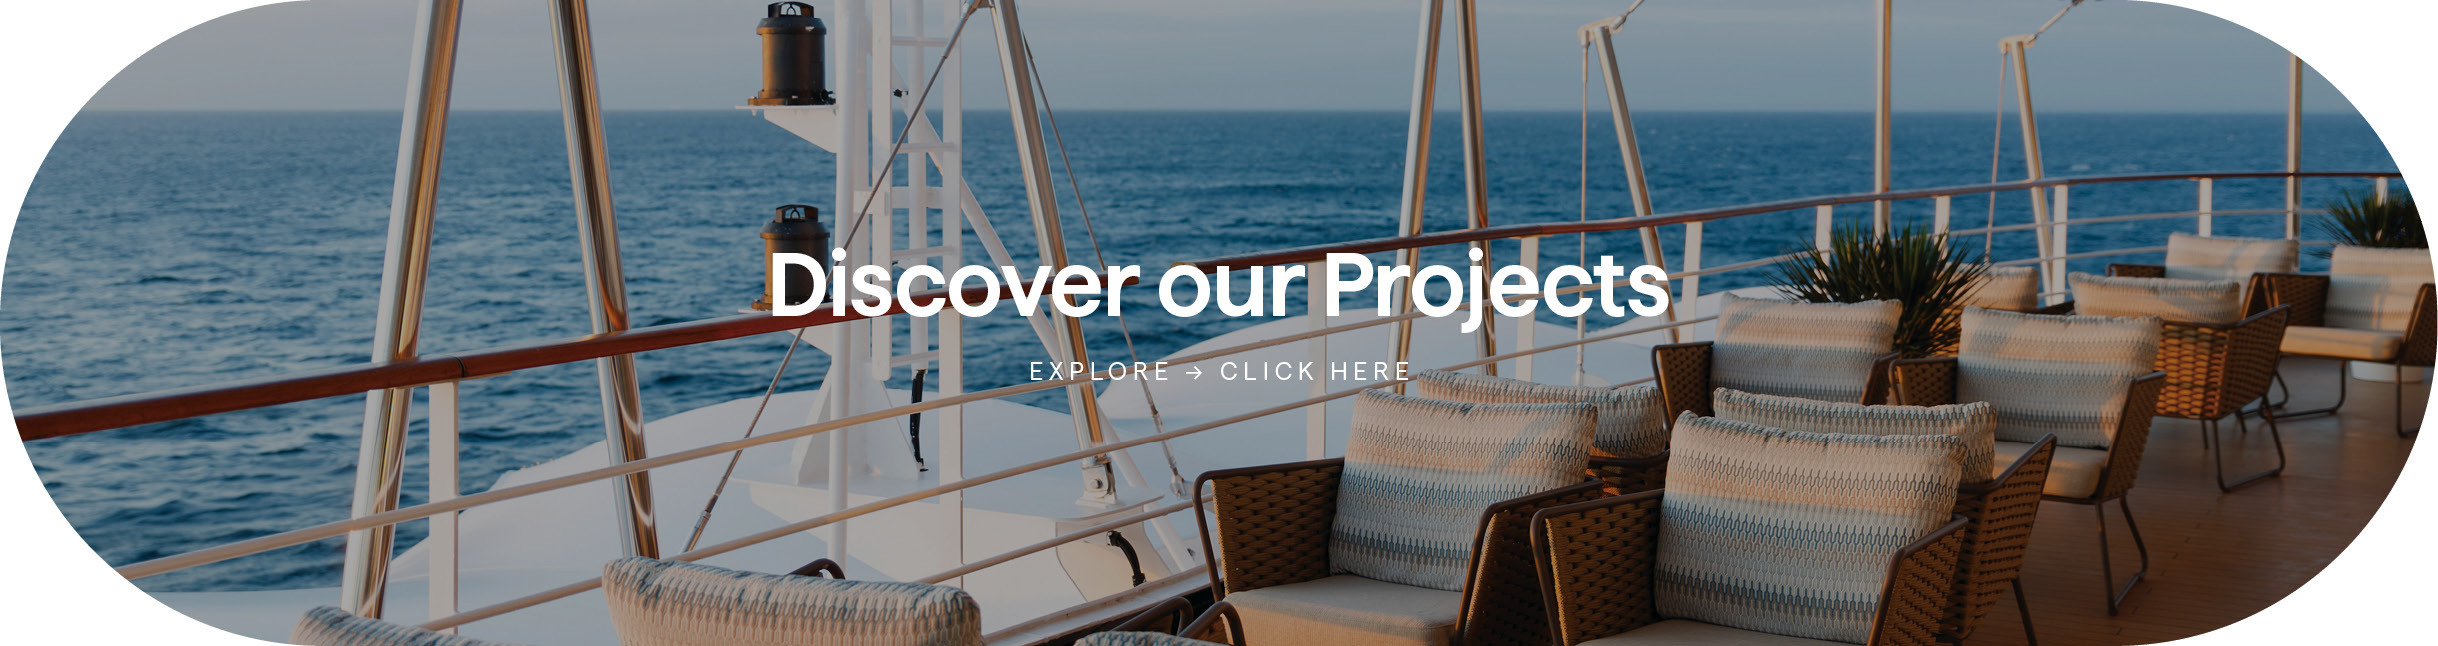 GEM Design for Cruise Ships - Discover our Projects